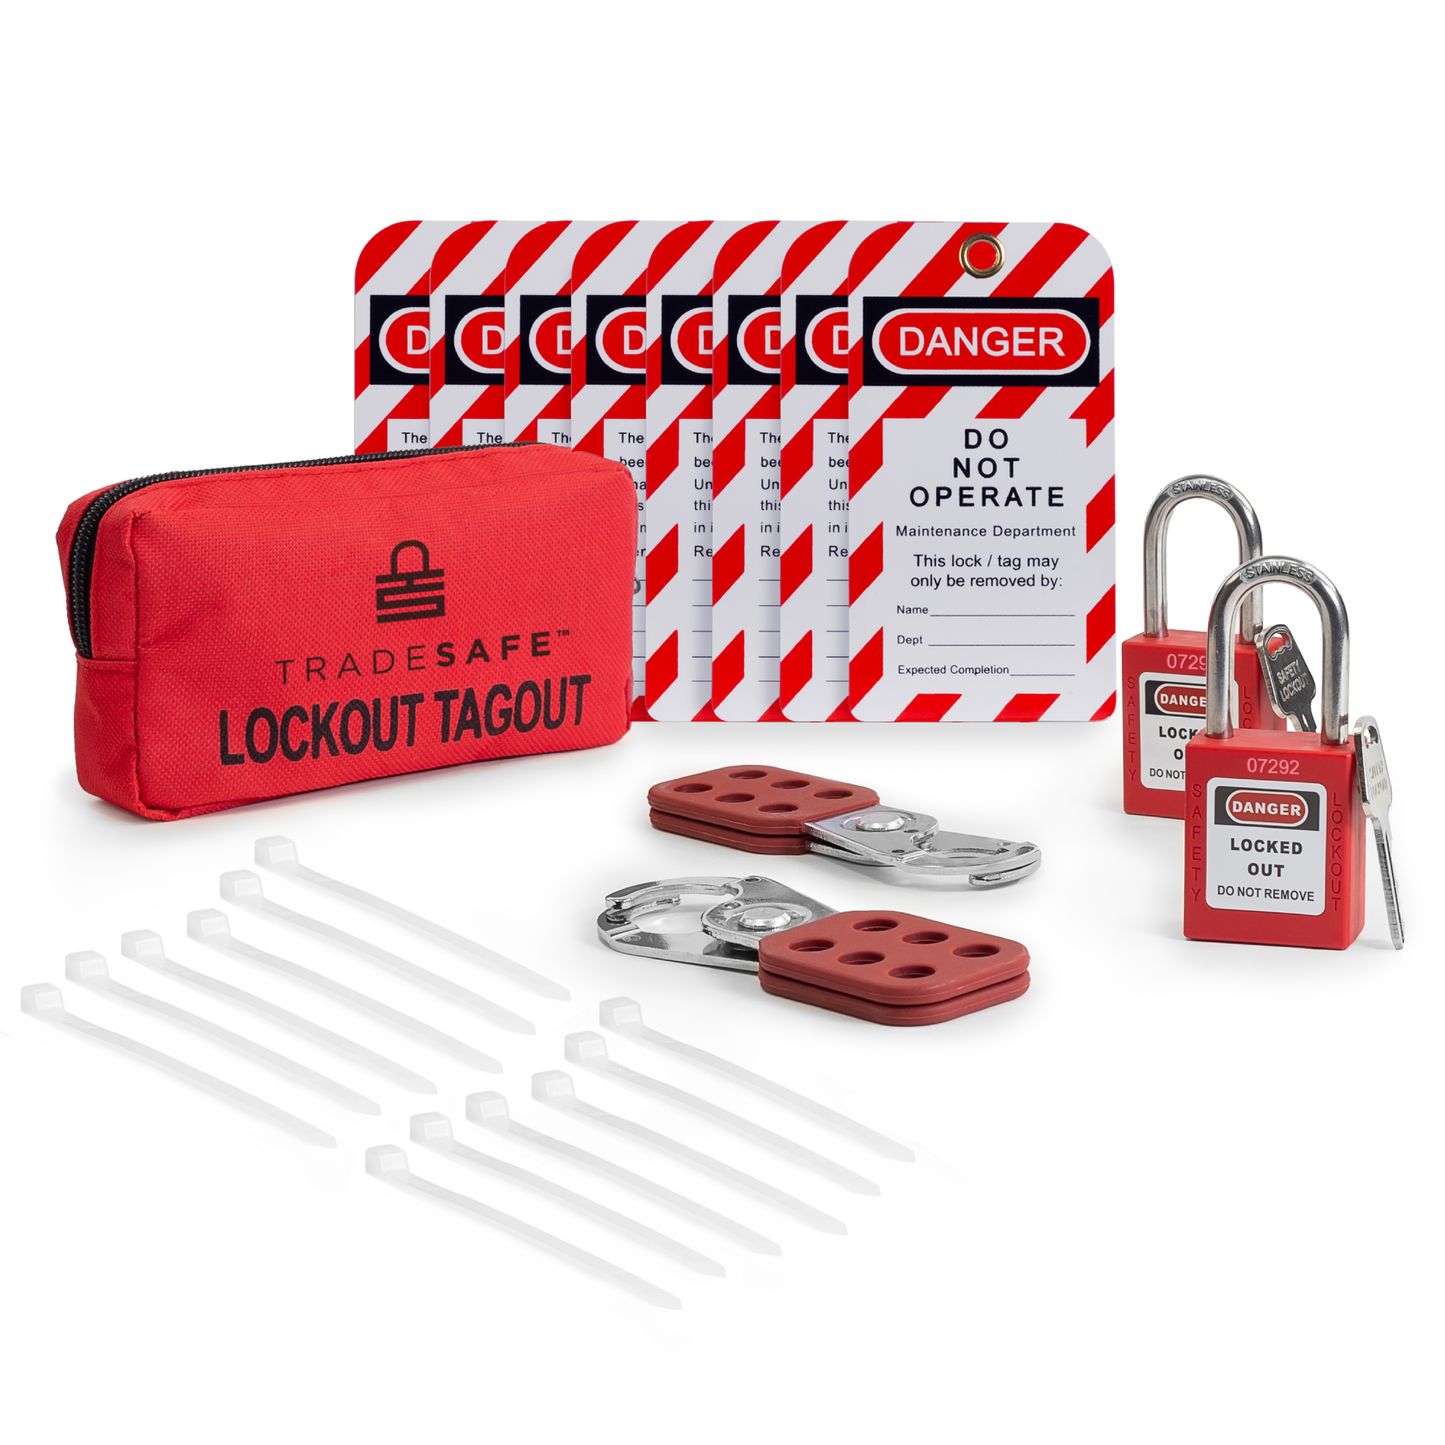 lockout tagout kit composed of 1 pouch, 12 zip ies, 2 steel hasps, 8 loto tags, and 2 keyed different padlocks with 1 key each